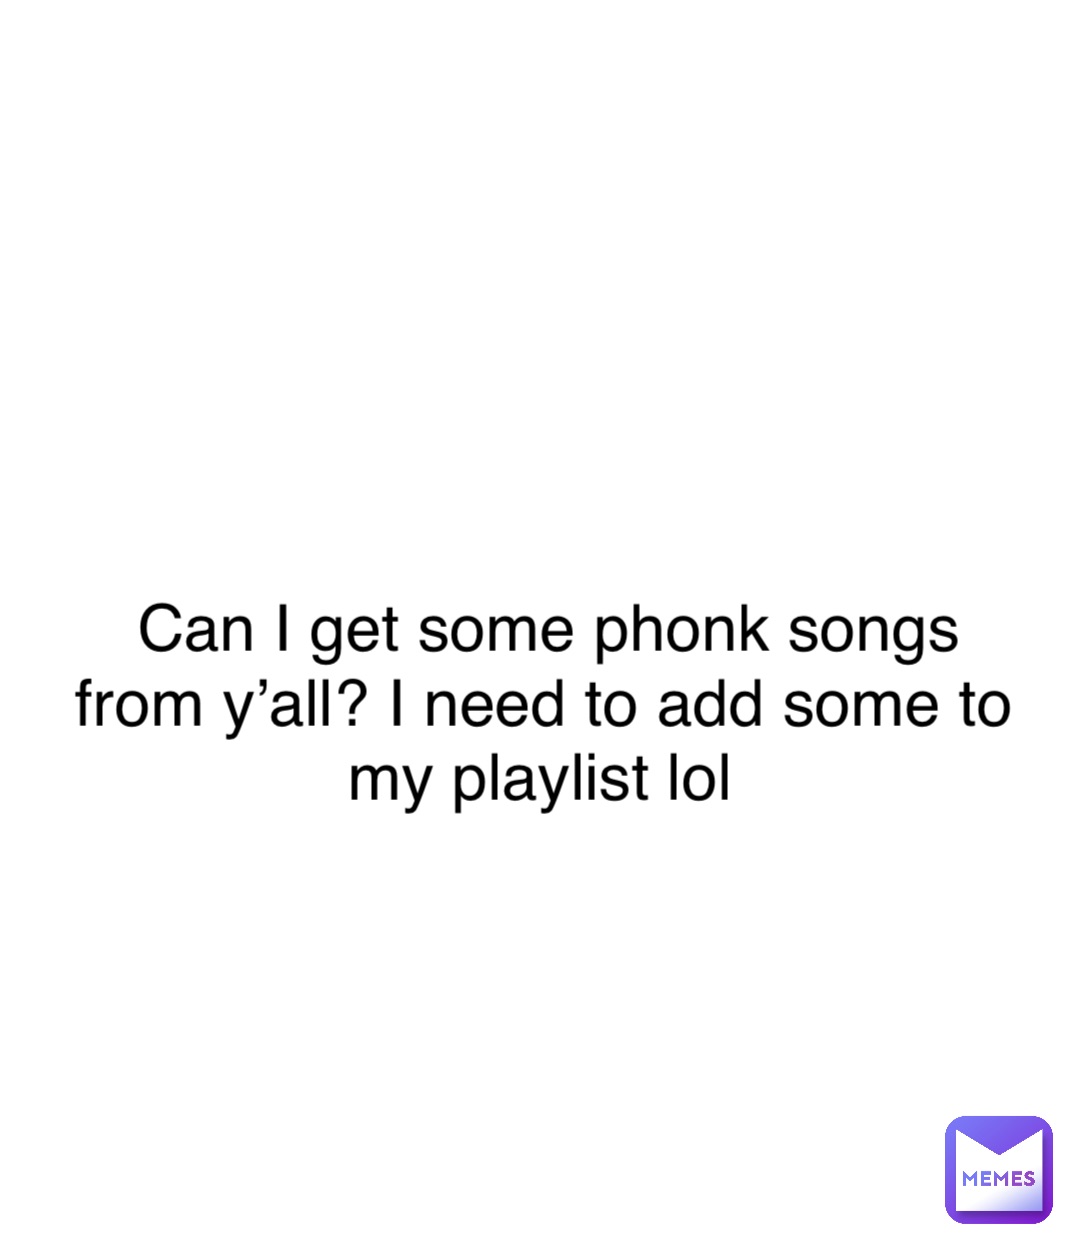 Double tap to edit Can I get some phonk songs from y’all? I need to add some to my playlist lol